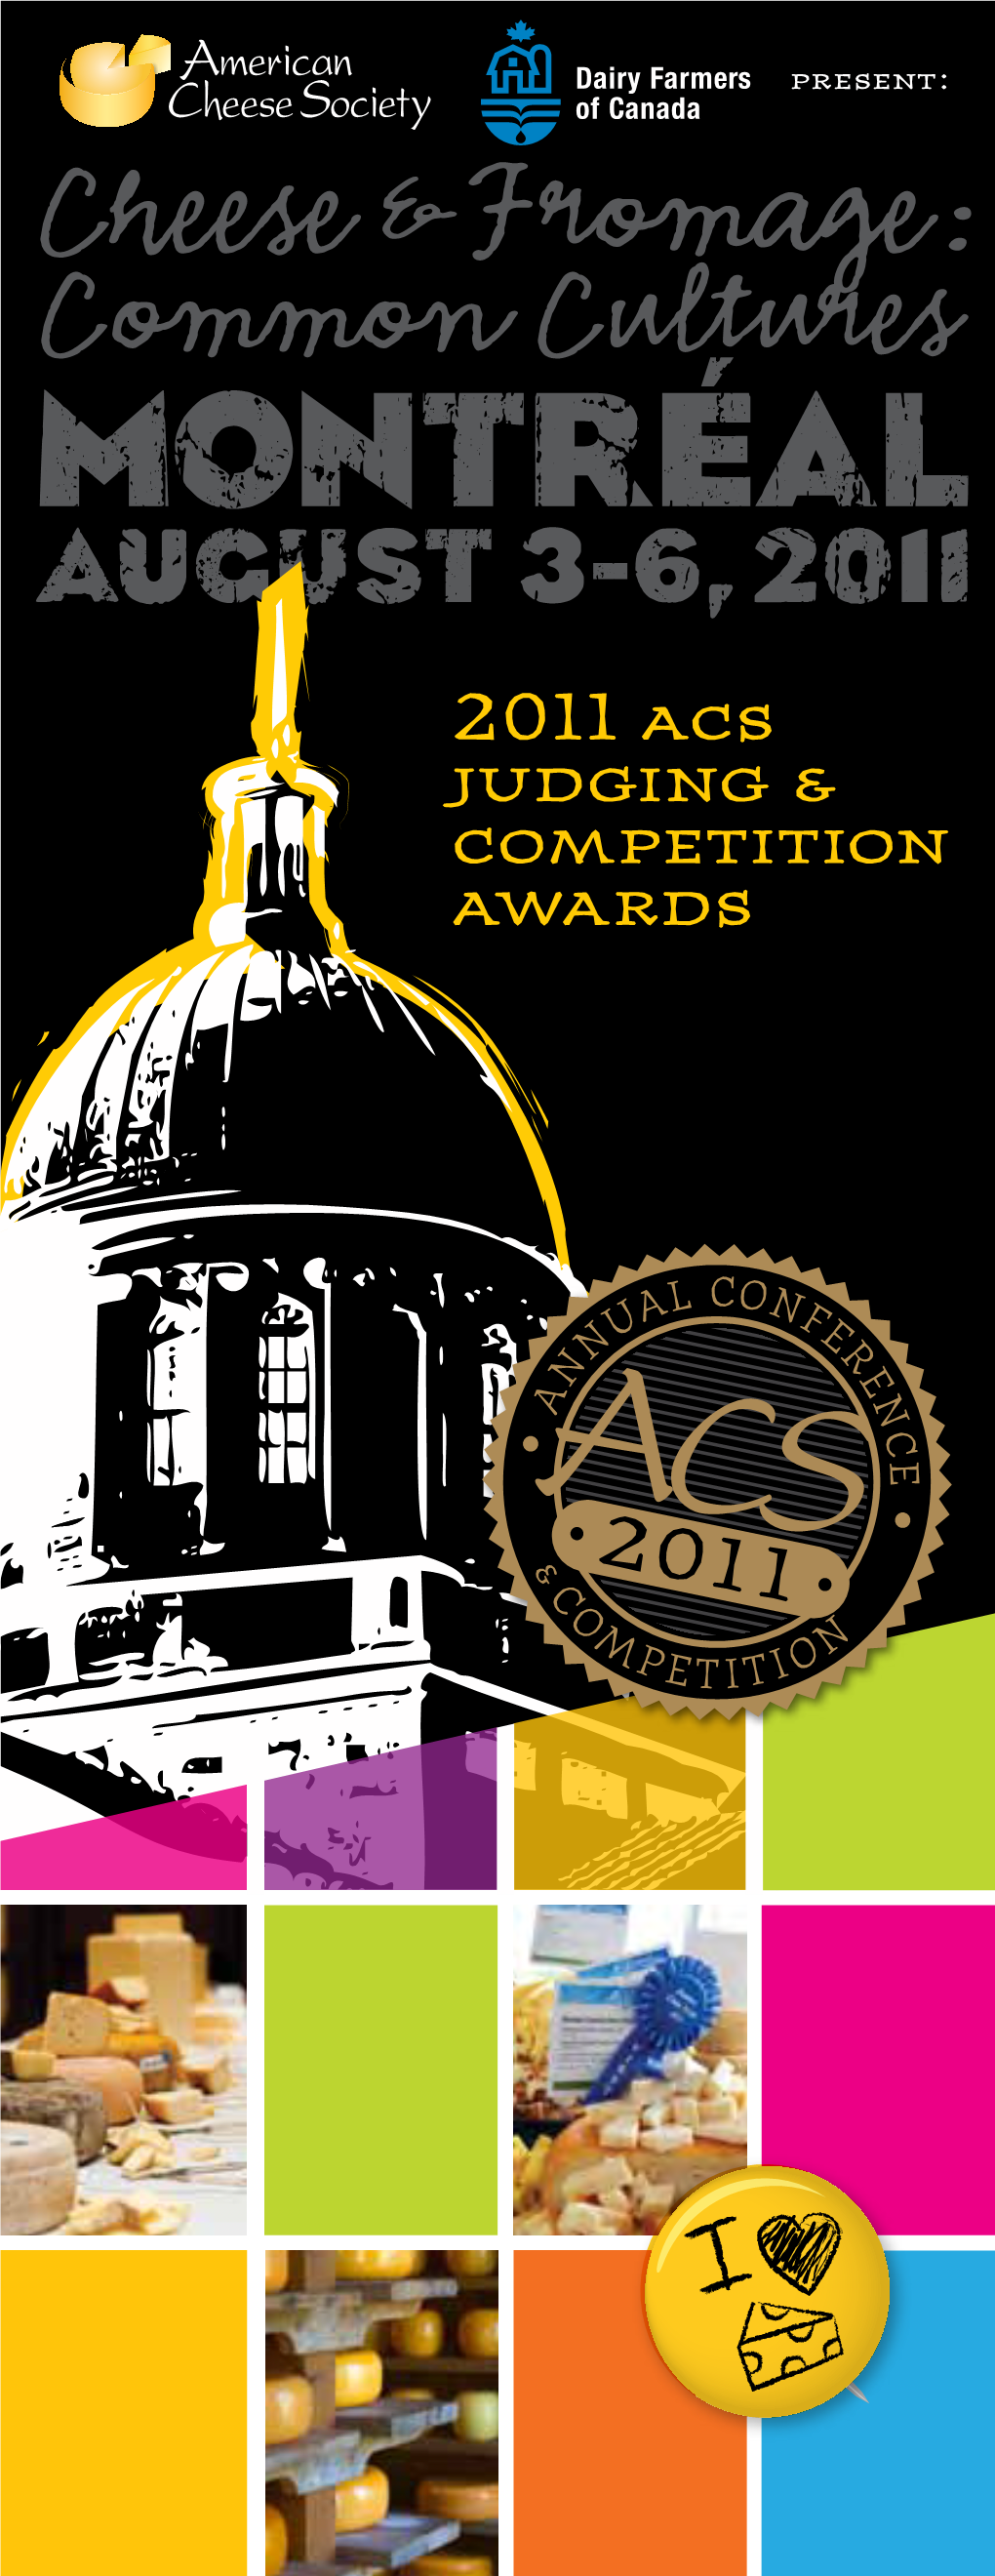 2011 Acs Judging & Competition Awards